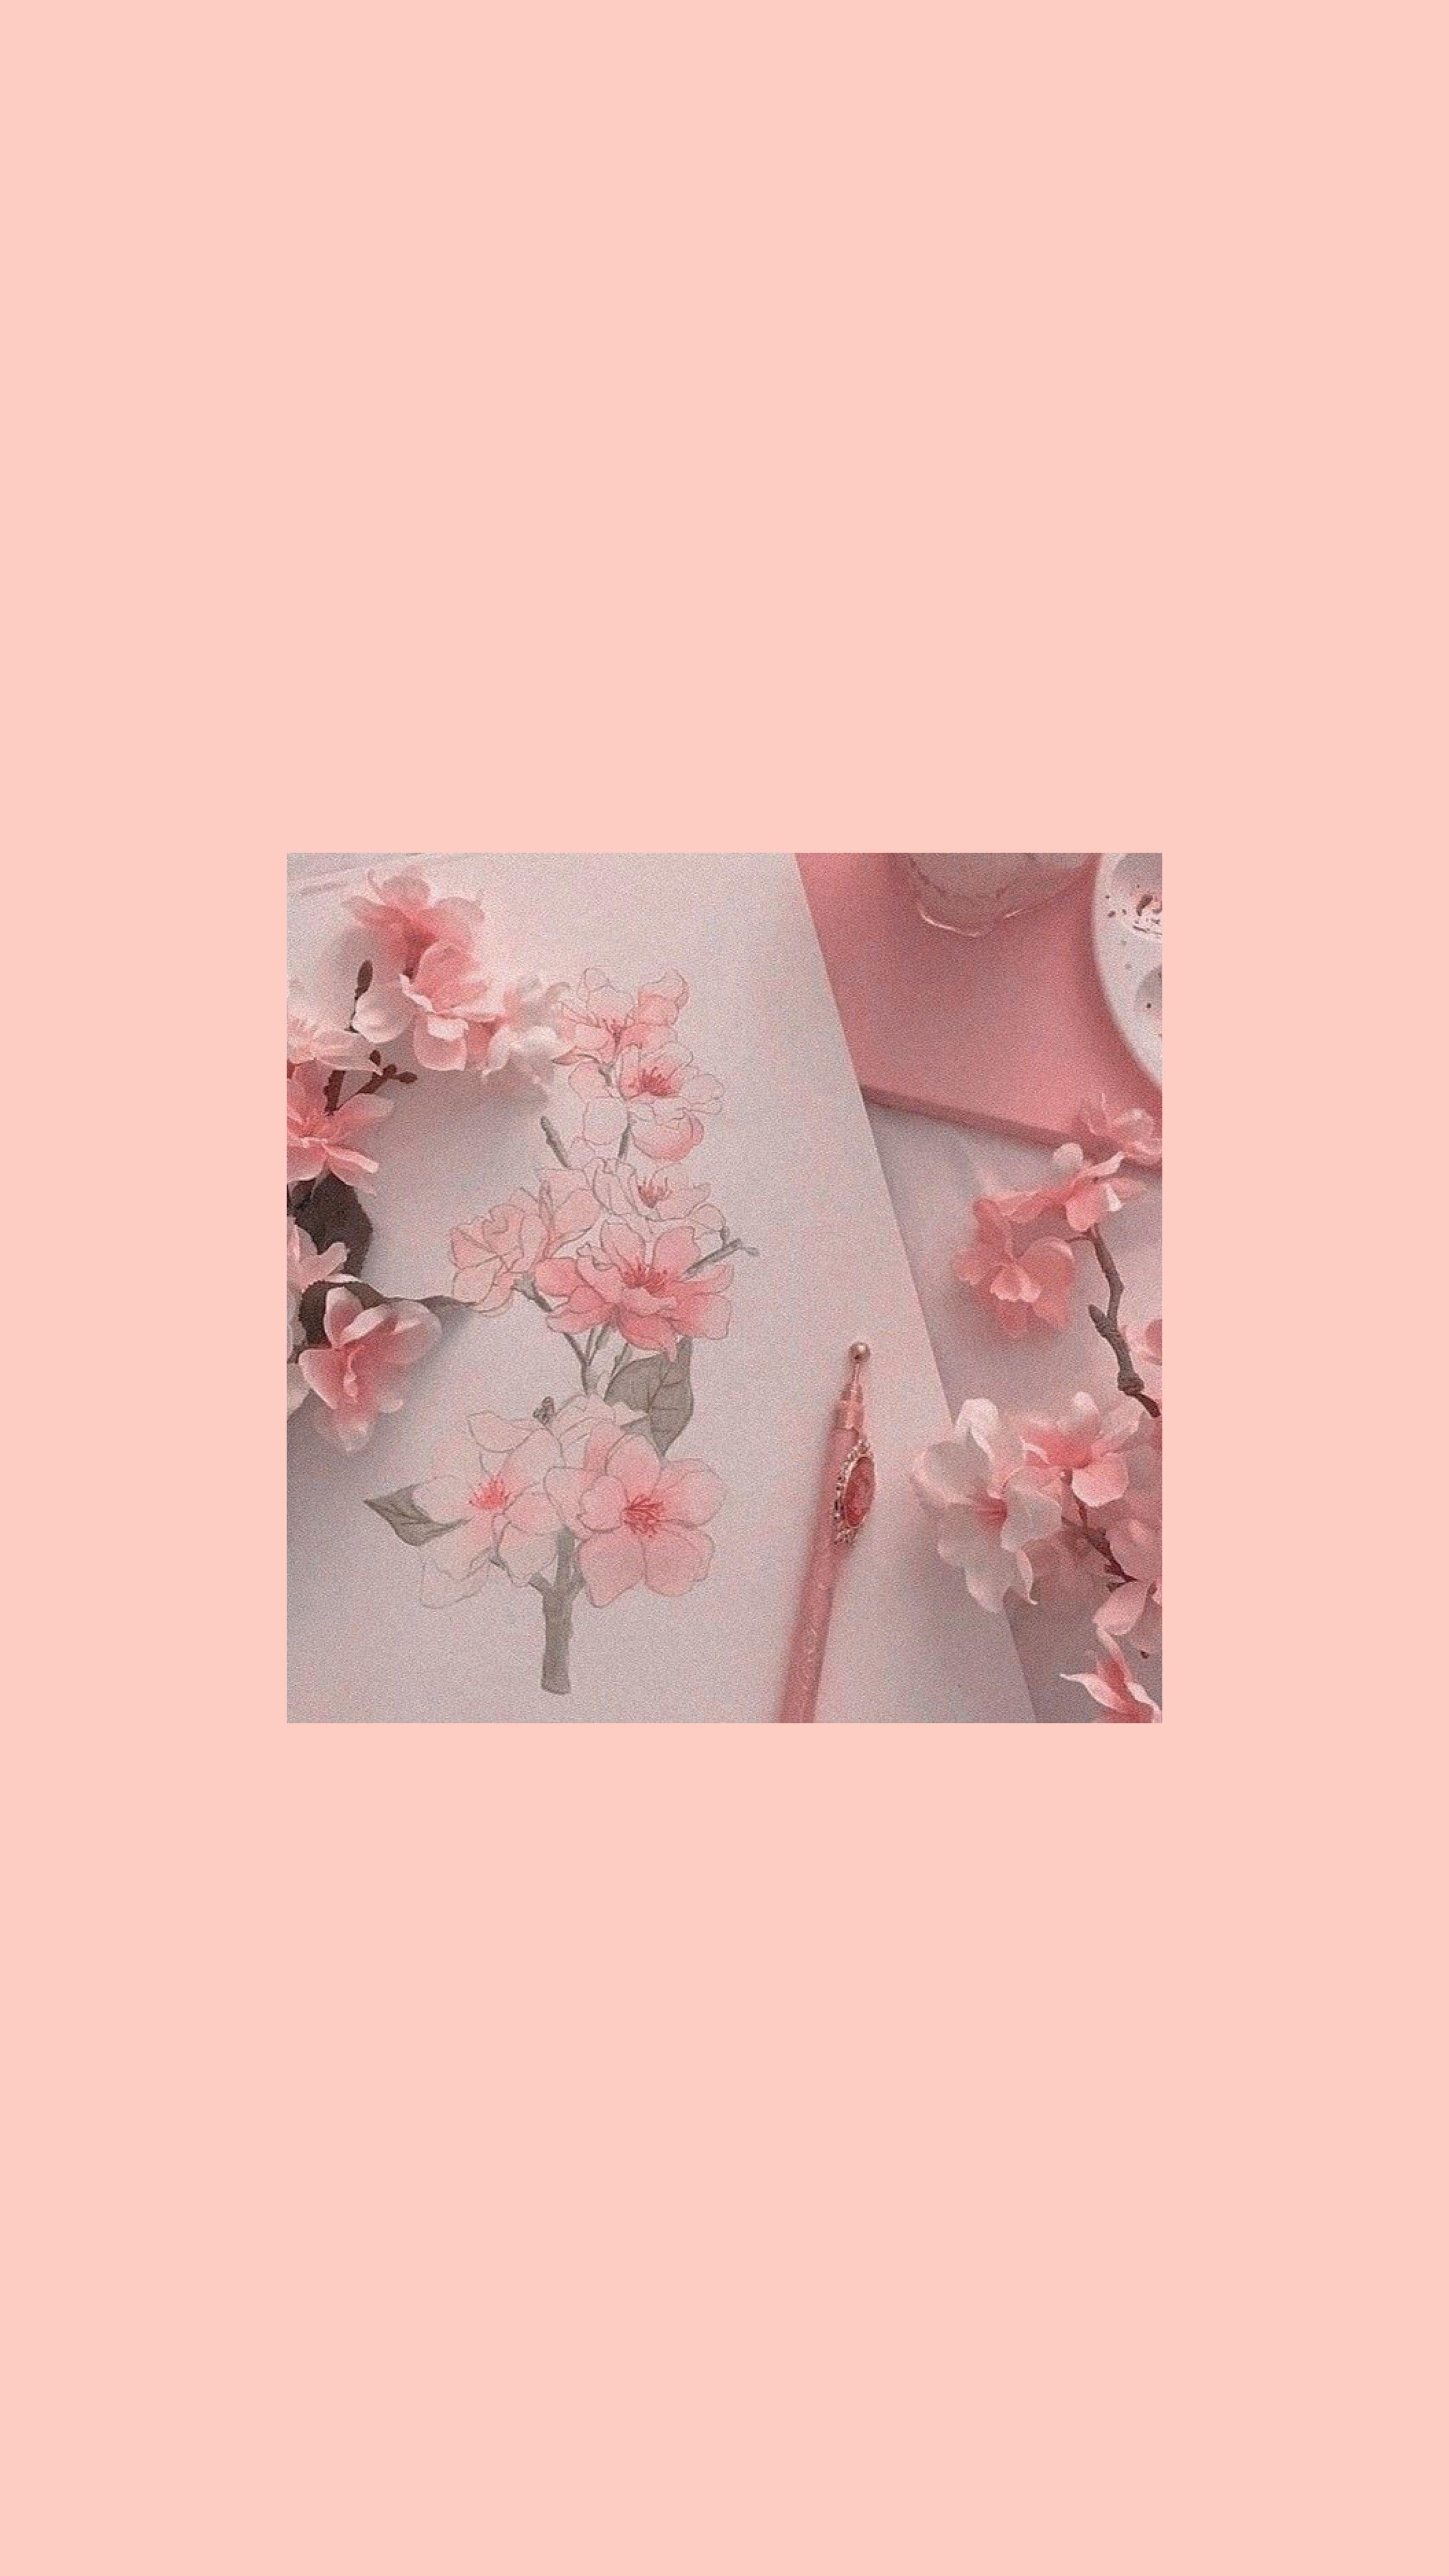 Soft Pink Aesthetic Wallpapers - Wallpaper Cave